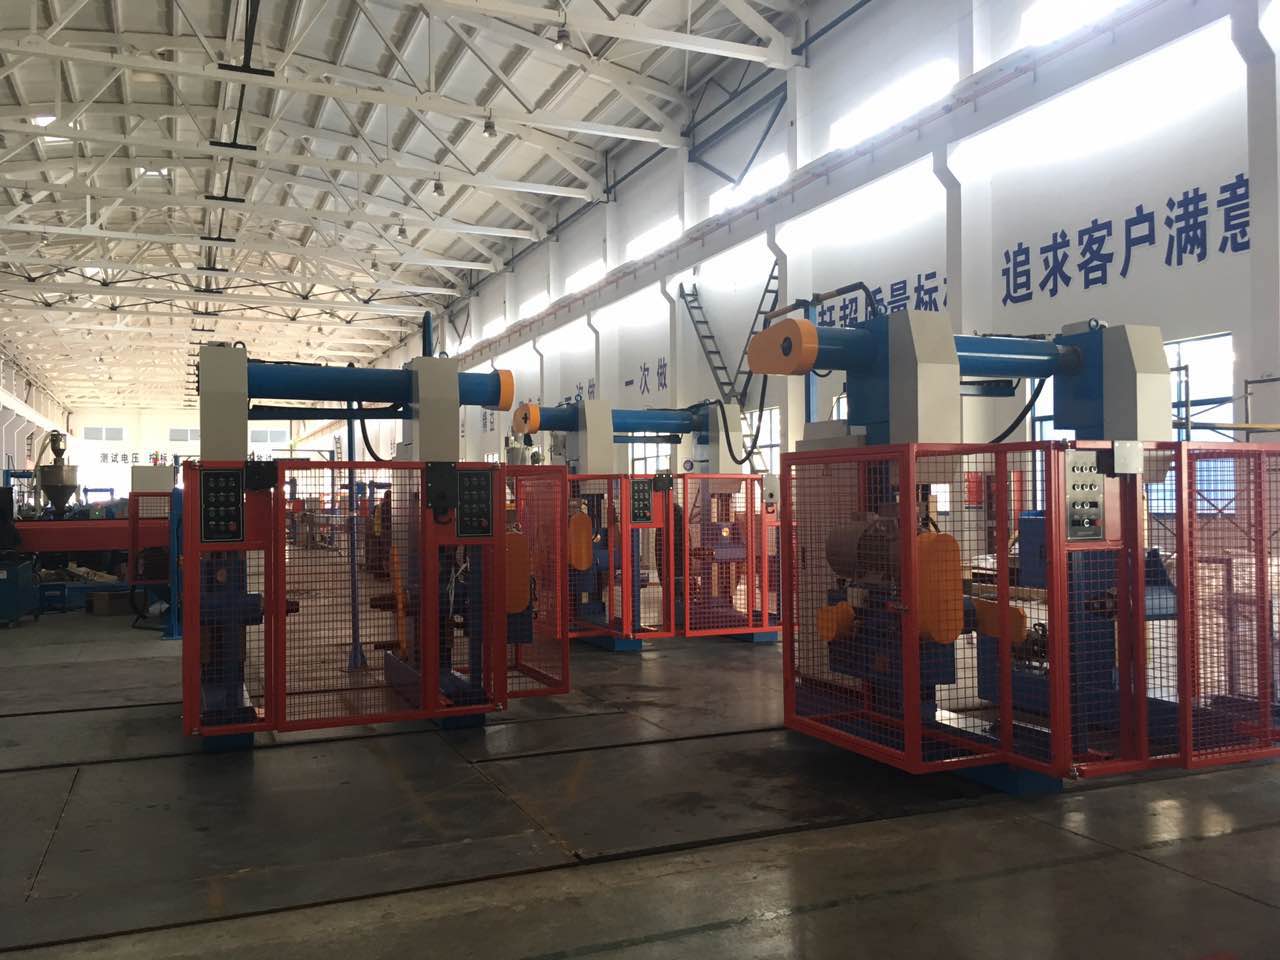 Rail gantry type Rewinding Line is being installed and debugged in our customer's factory